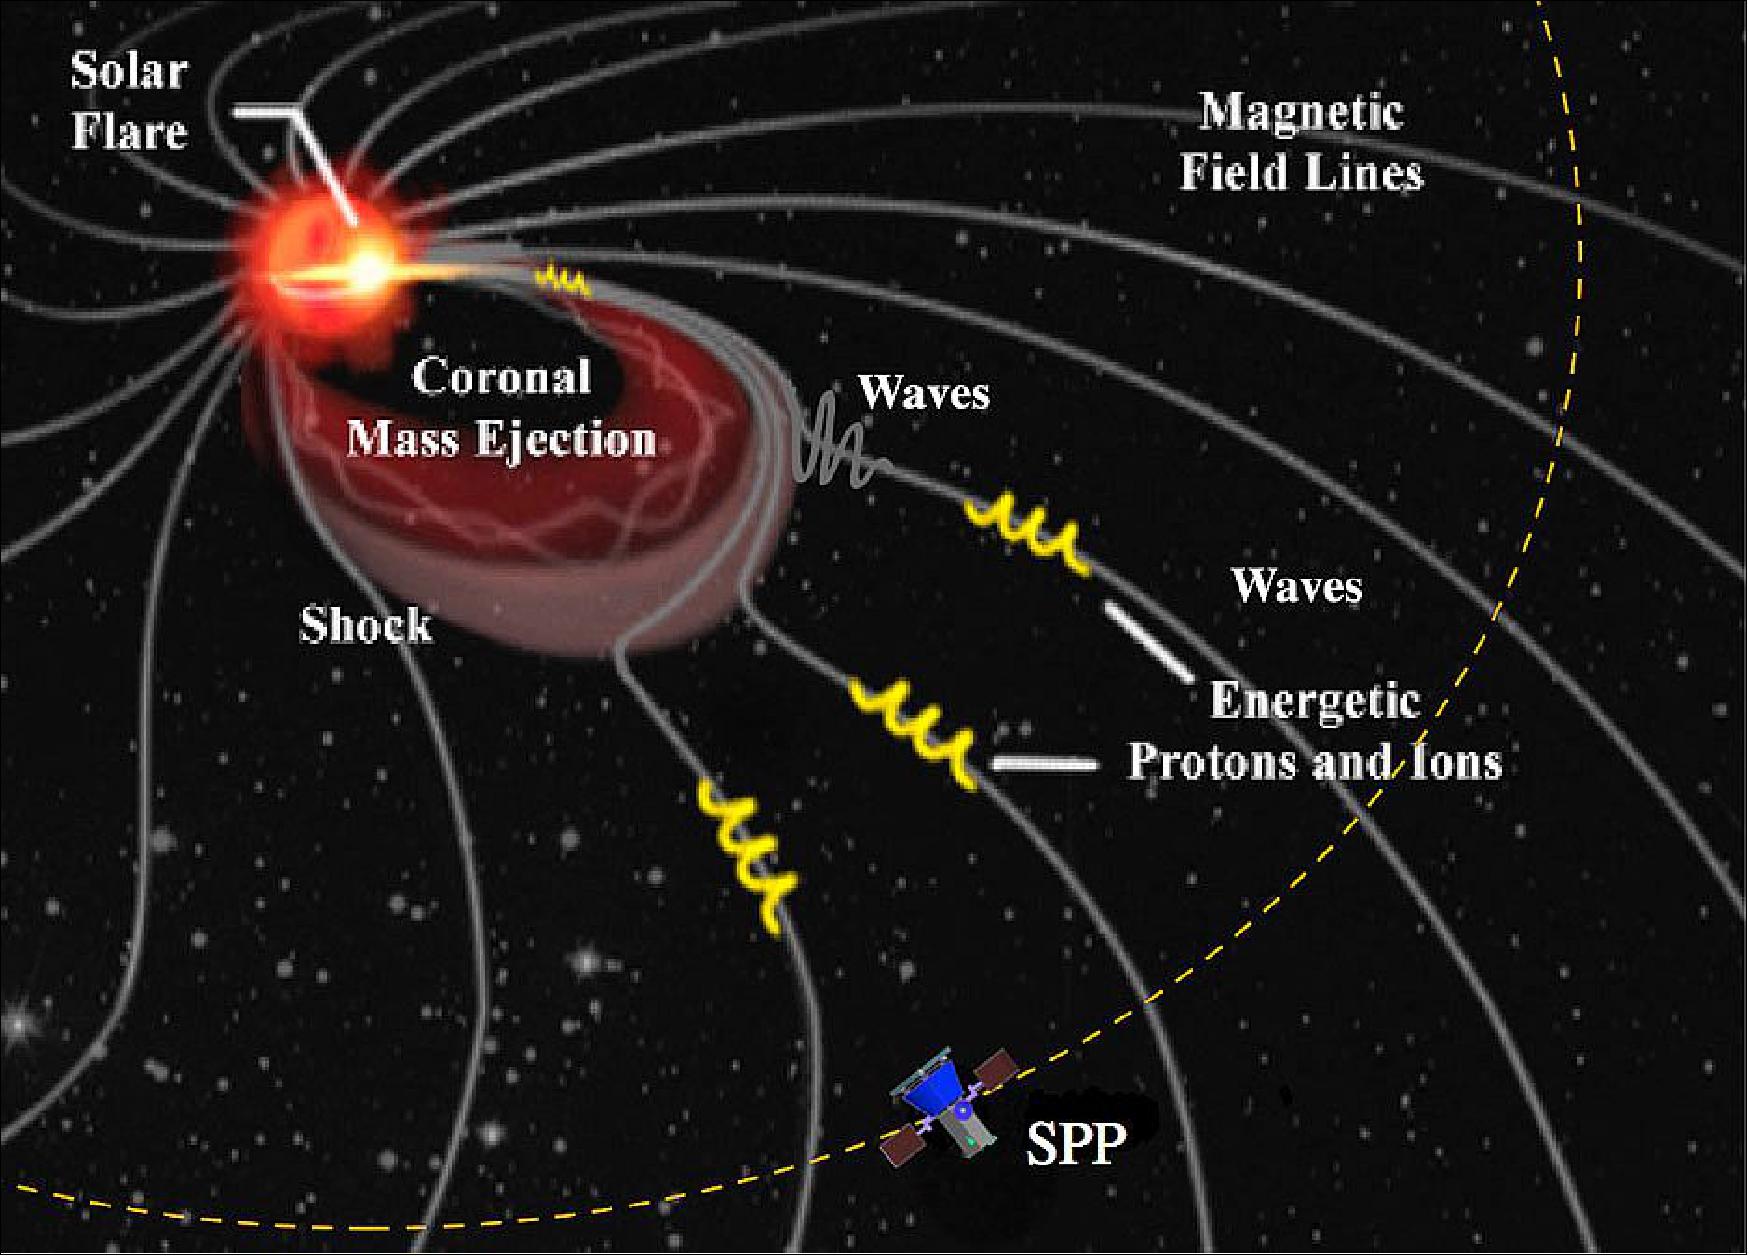 Figure 3: SPP, shown along its orbit (dashed curve) near a perihelion pass, will measure solar energetic ions and electrons from a vantage point very near the site where these particles are accelerated. The illustration sketches the occurrence of a solar flare and a CME extending a few RS from the Sun. The shock at the front edge of the CME and the compressed sheath plasma behind the shock form as the CME, with its entrained flux rope (tangled pink lines), pushes outward from the Sun through the ambient solar wind. Swept-up magnetic field lines are refracted and compressed across the shock and draped around the CME. Energetic particles accelerated at both the flare and CME shock are shown spiraling away from the Sun (yellow spirals) along the magnetic field. For simplicity, magnetic field lines around the shock are depicted as smooth. However, it is expected that the field ahead of CME shock and in the sheath will highly structured.Waves ahead of the shock that are produced by high intensities of shock-accelerated ions streaming away from the shock are sketched for the uppermost magnetic field line connected to the CME shock (image credit: Ref.16)